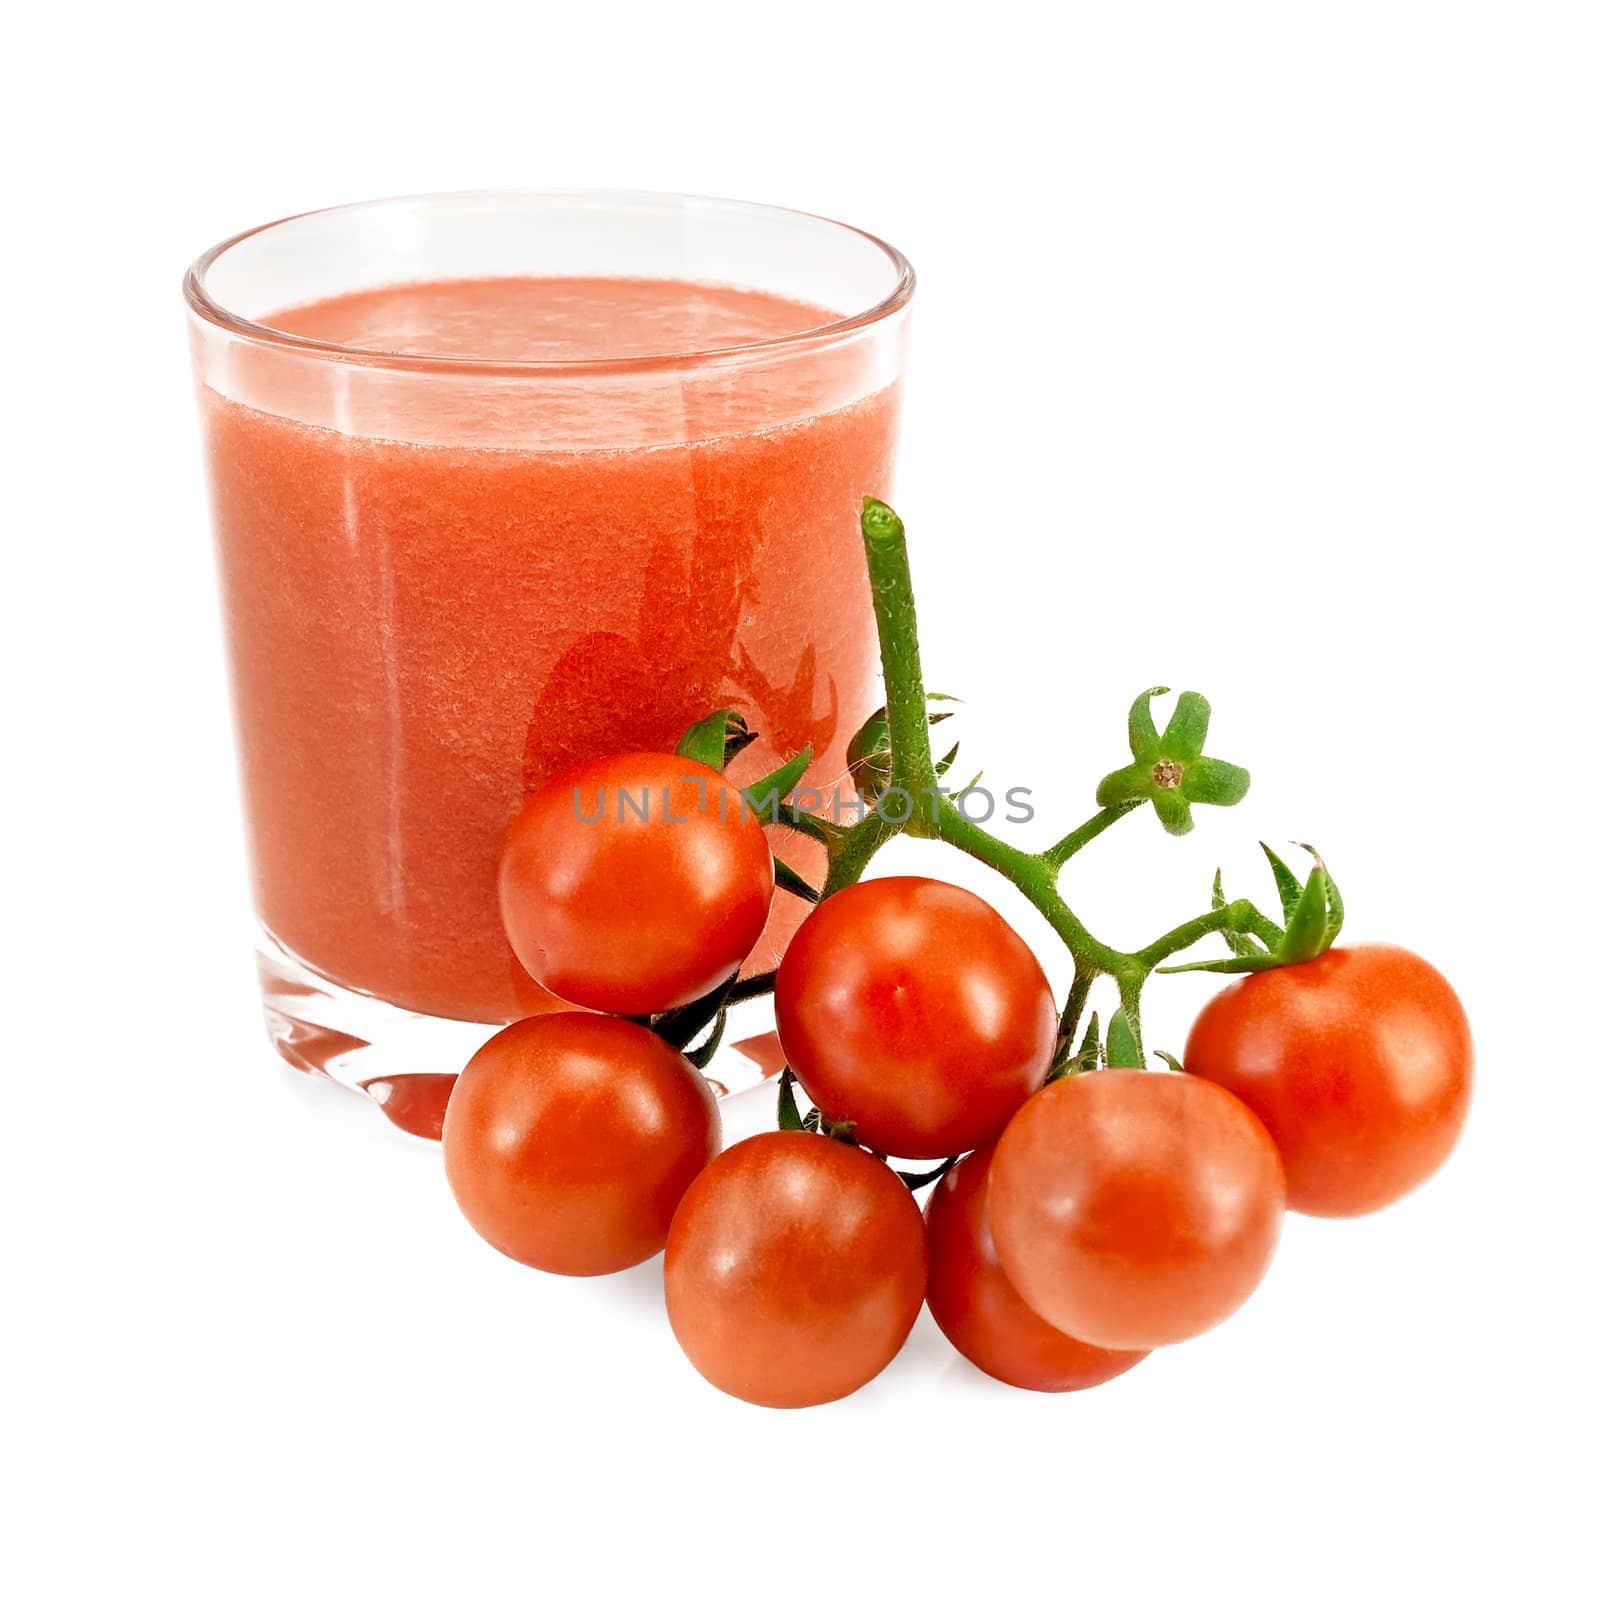 Tomato juice in low broad glass with a cluster of small tomatoes isolated on white background